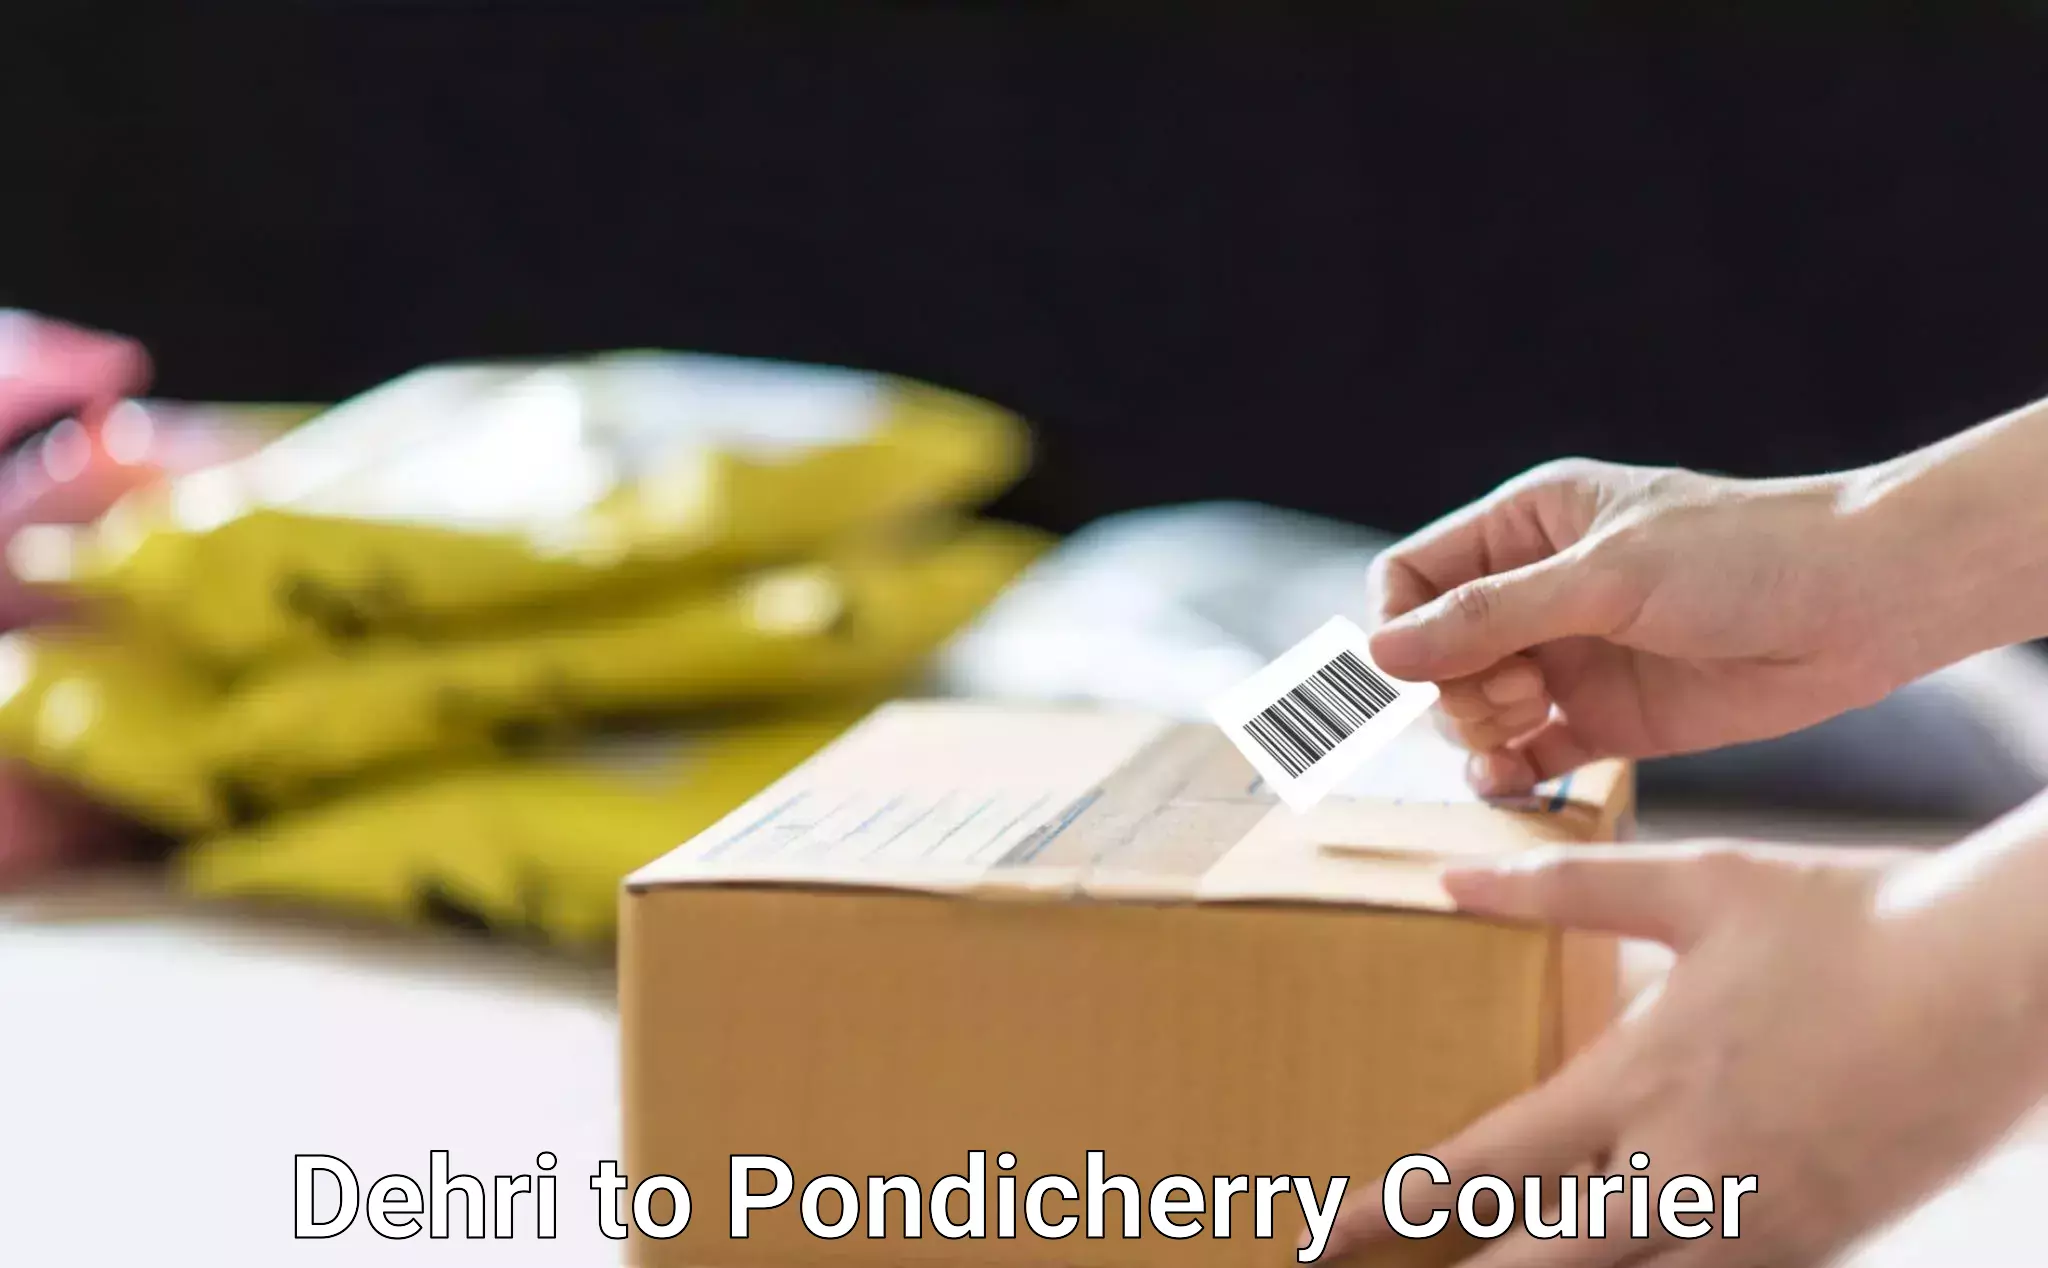 Professional movers and packers Dehri to Pondicherry